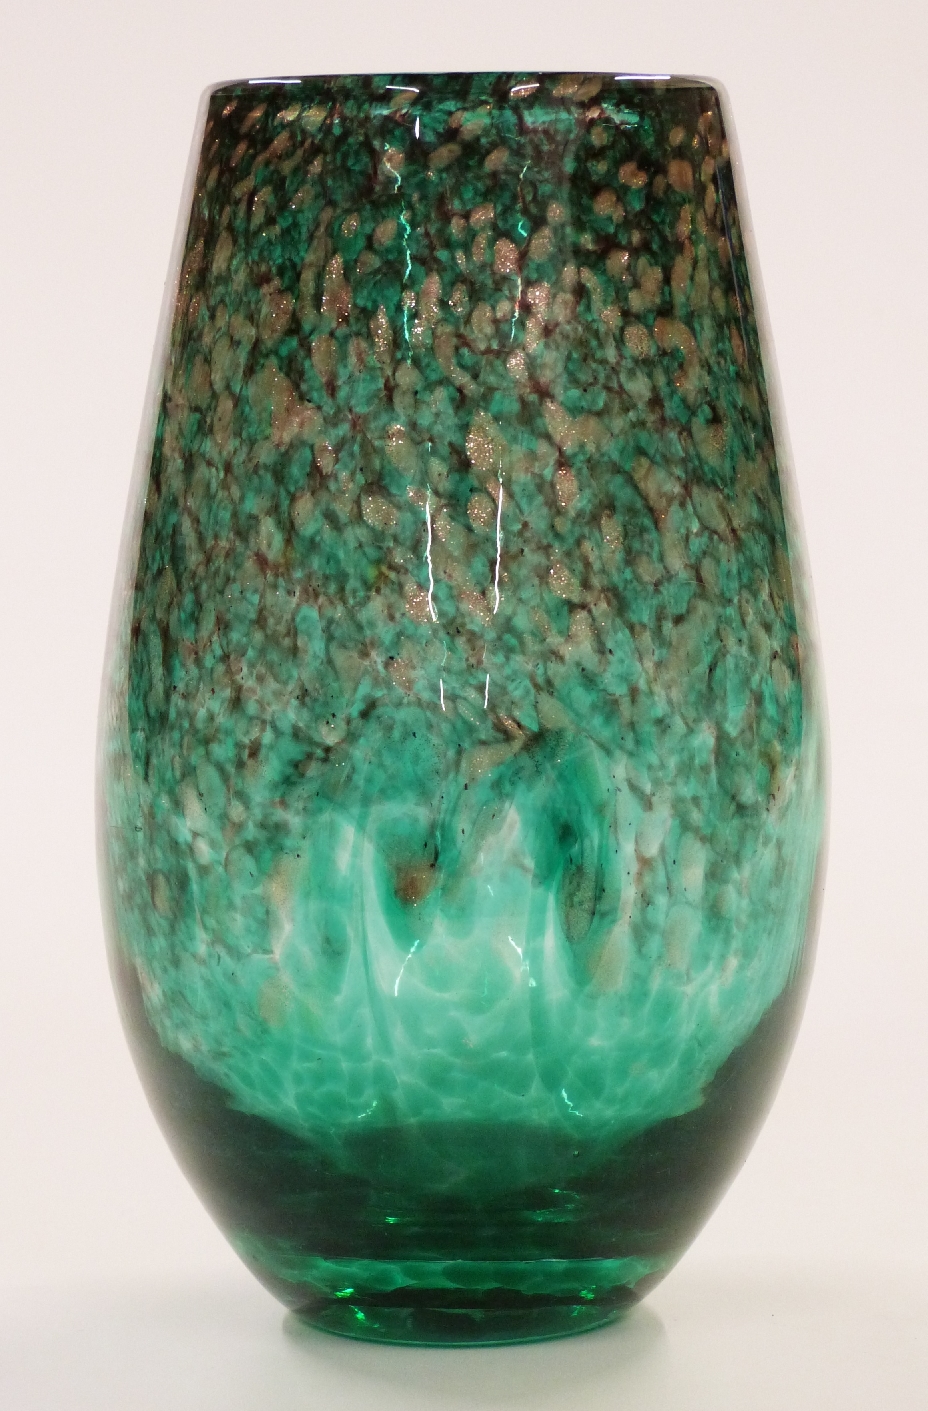 Two pieces of Strathearn glass both with green and black mottled ground and aventurine flecks, one a - Image 3 of 3